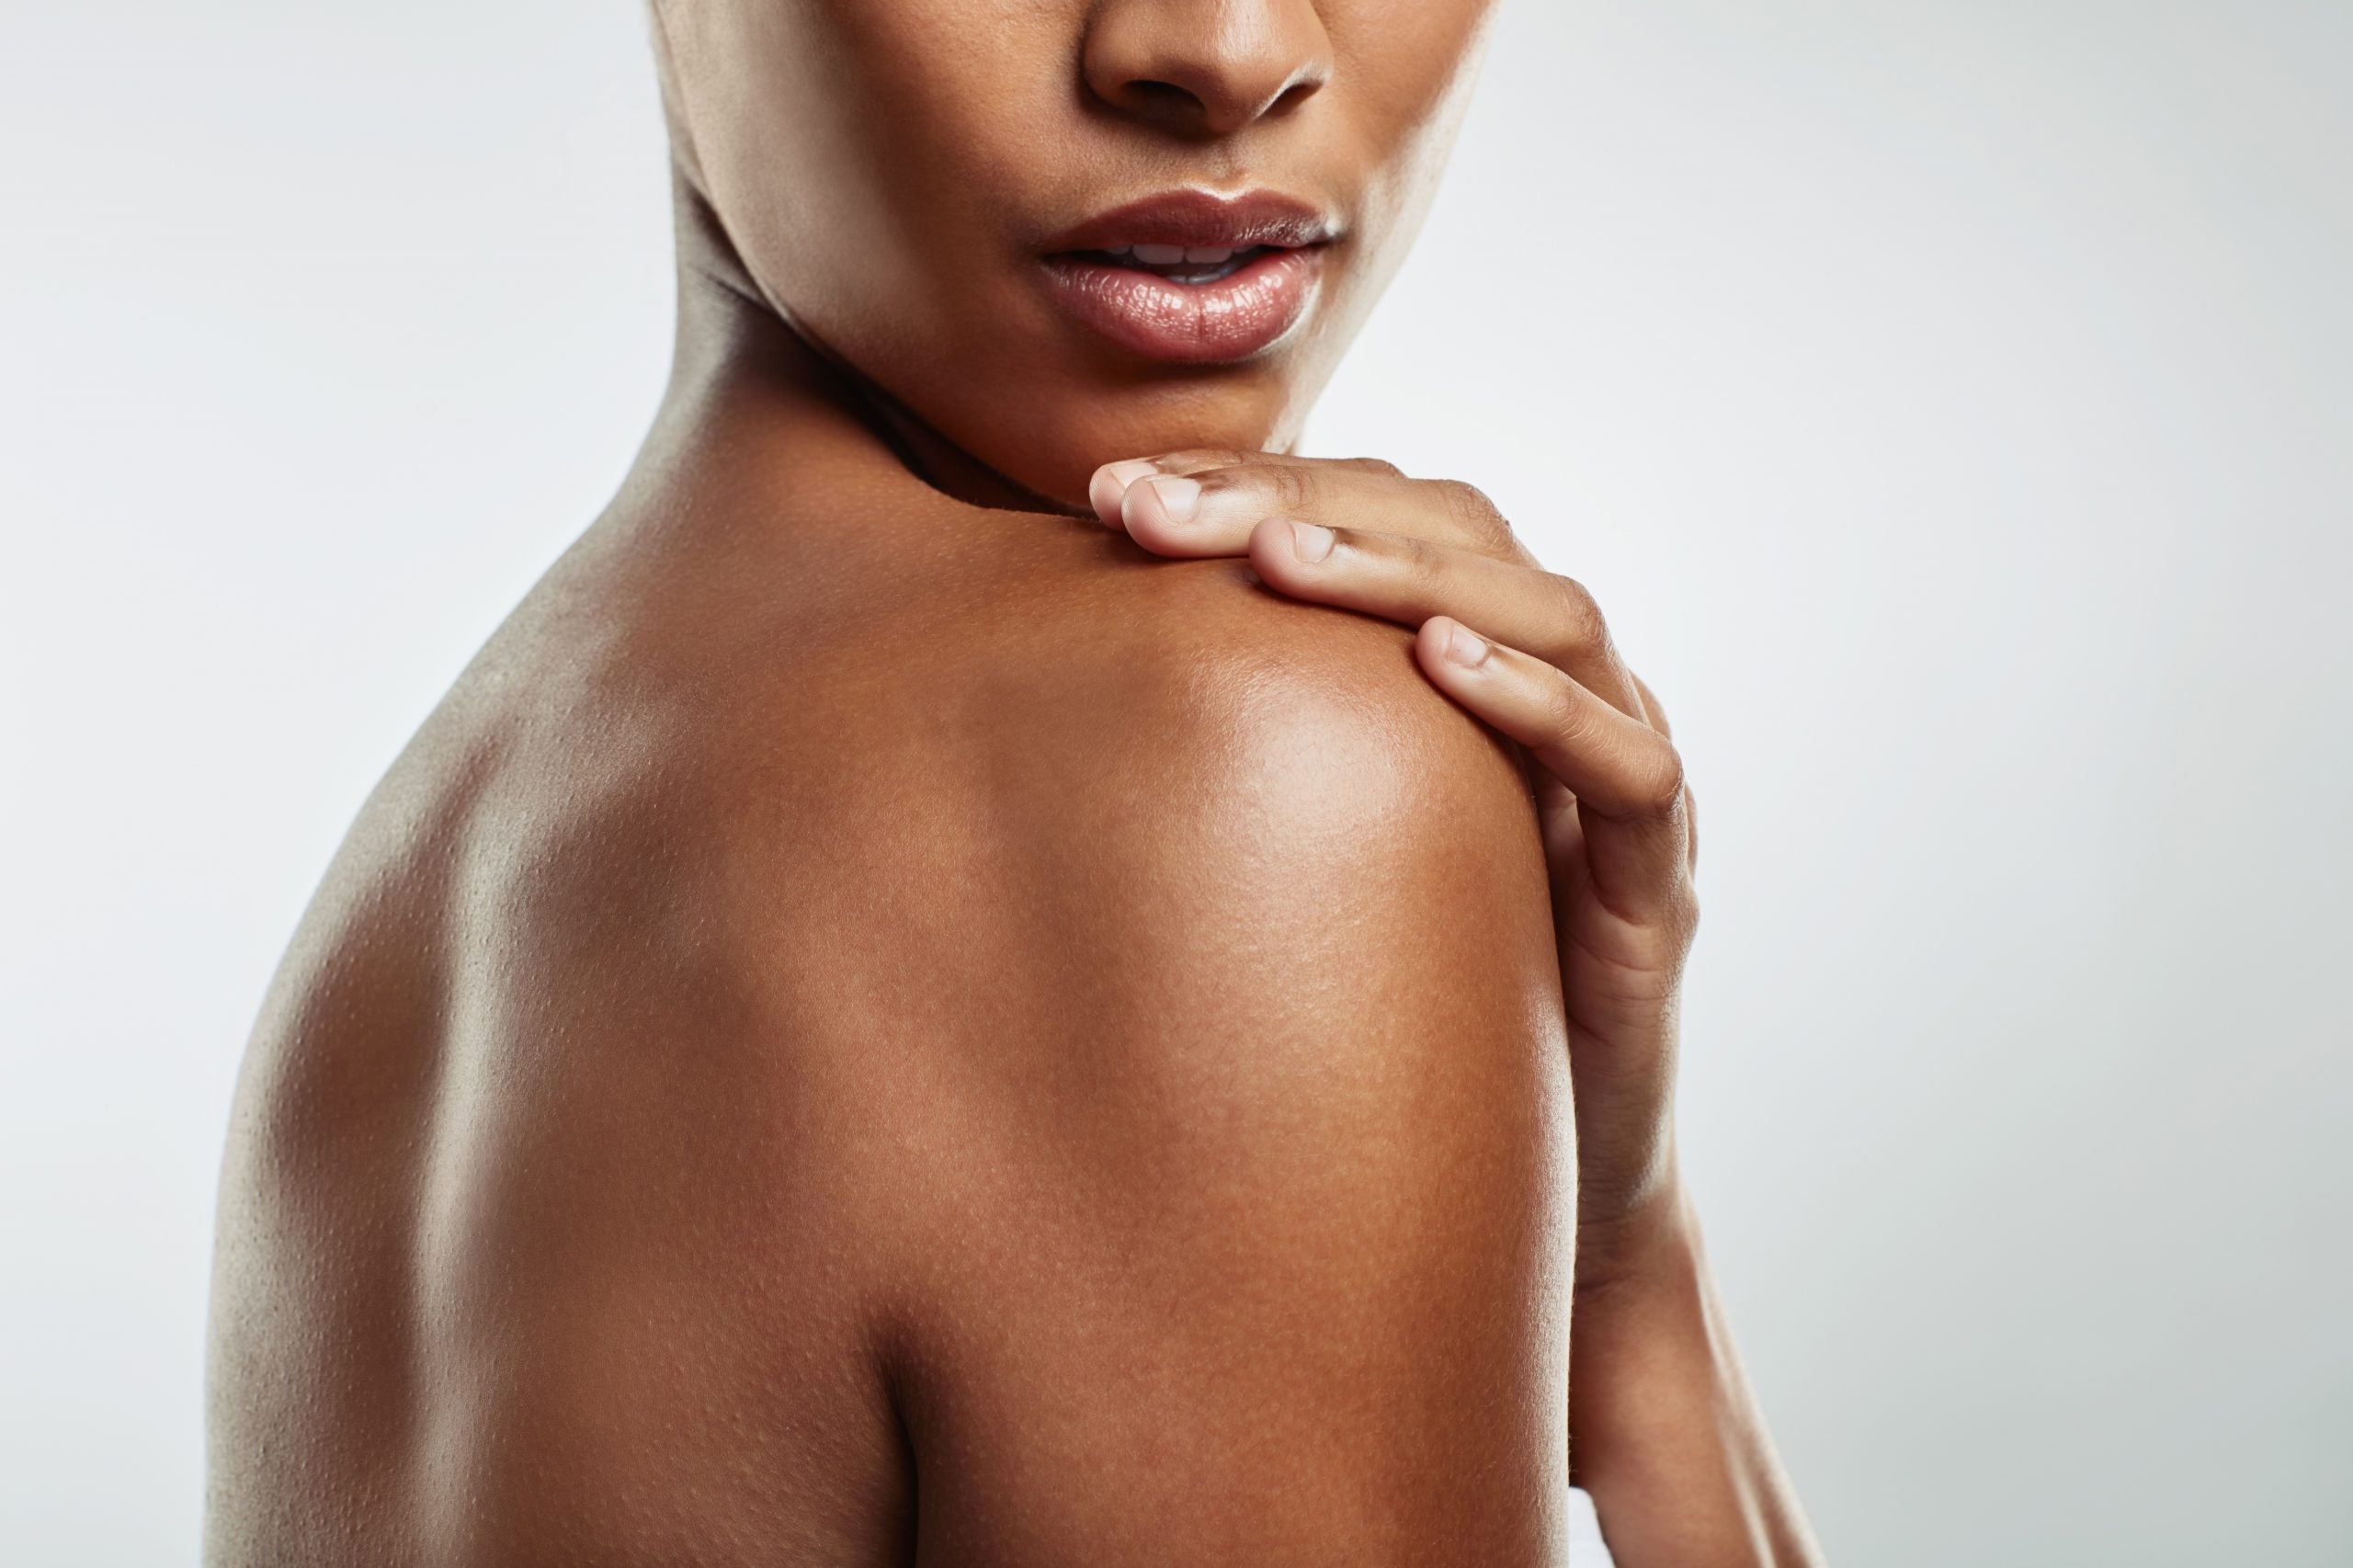 Healthy SKINgredients: Learn Which Ingredients Are Best for Treating Uneven Tone, Hyperpigmentation, and Eczema